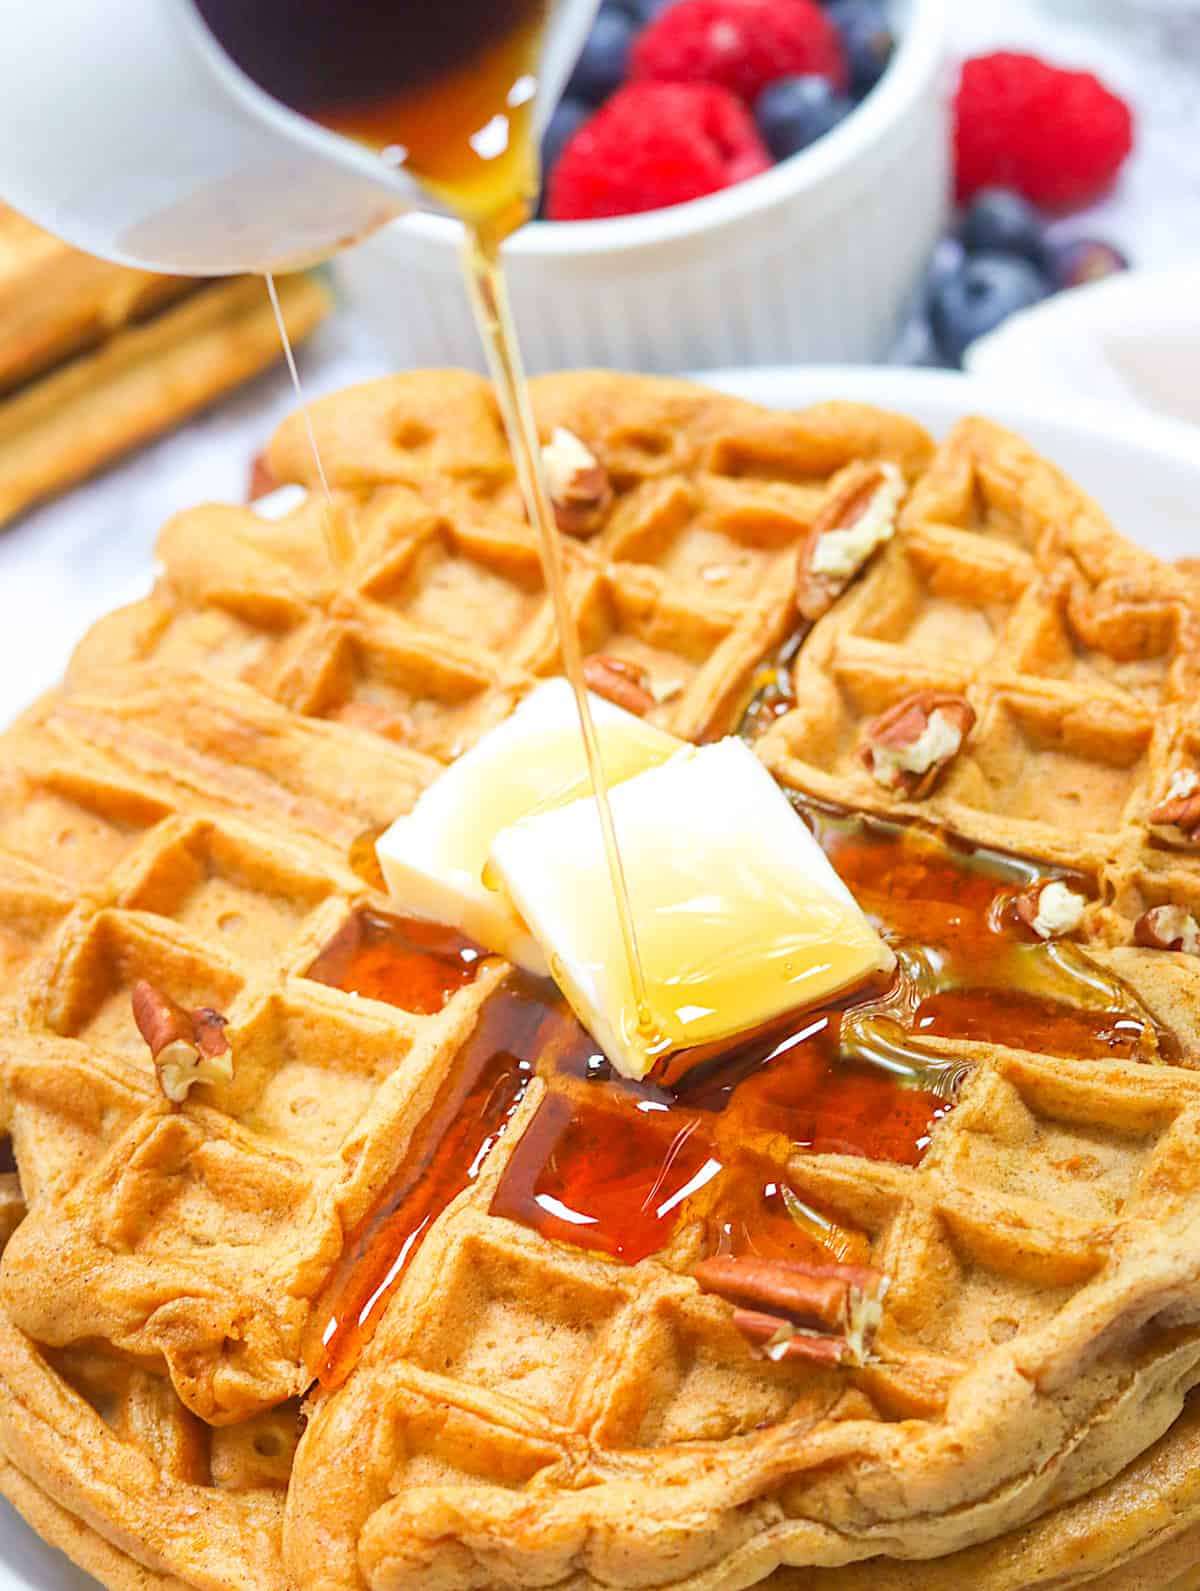 Drizzling decadent maple syrup over sweet potato waffles with butter